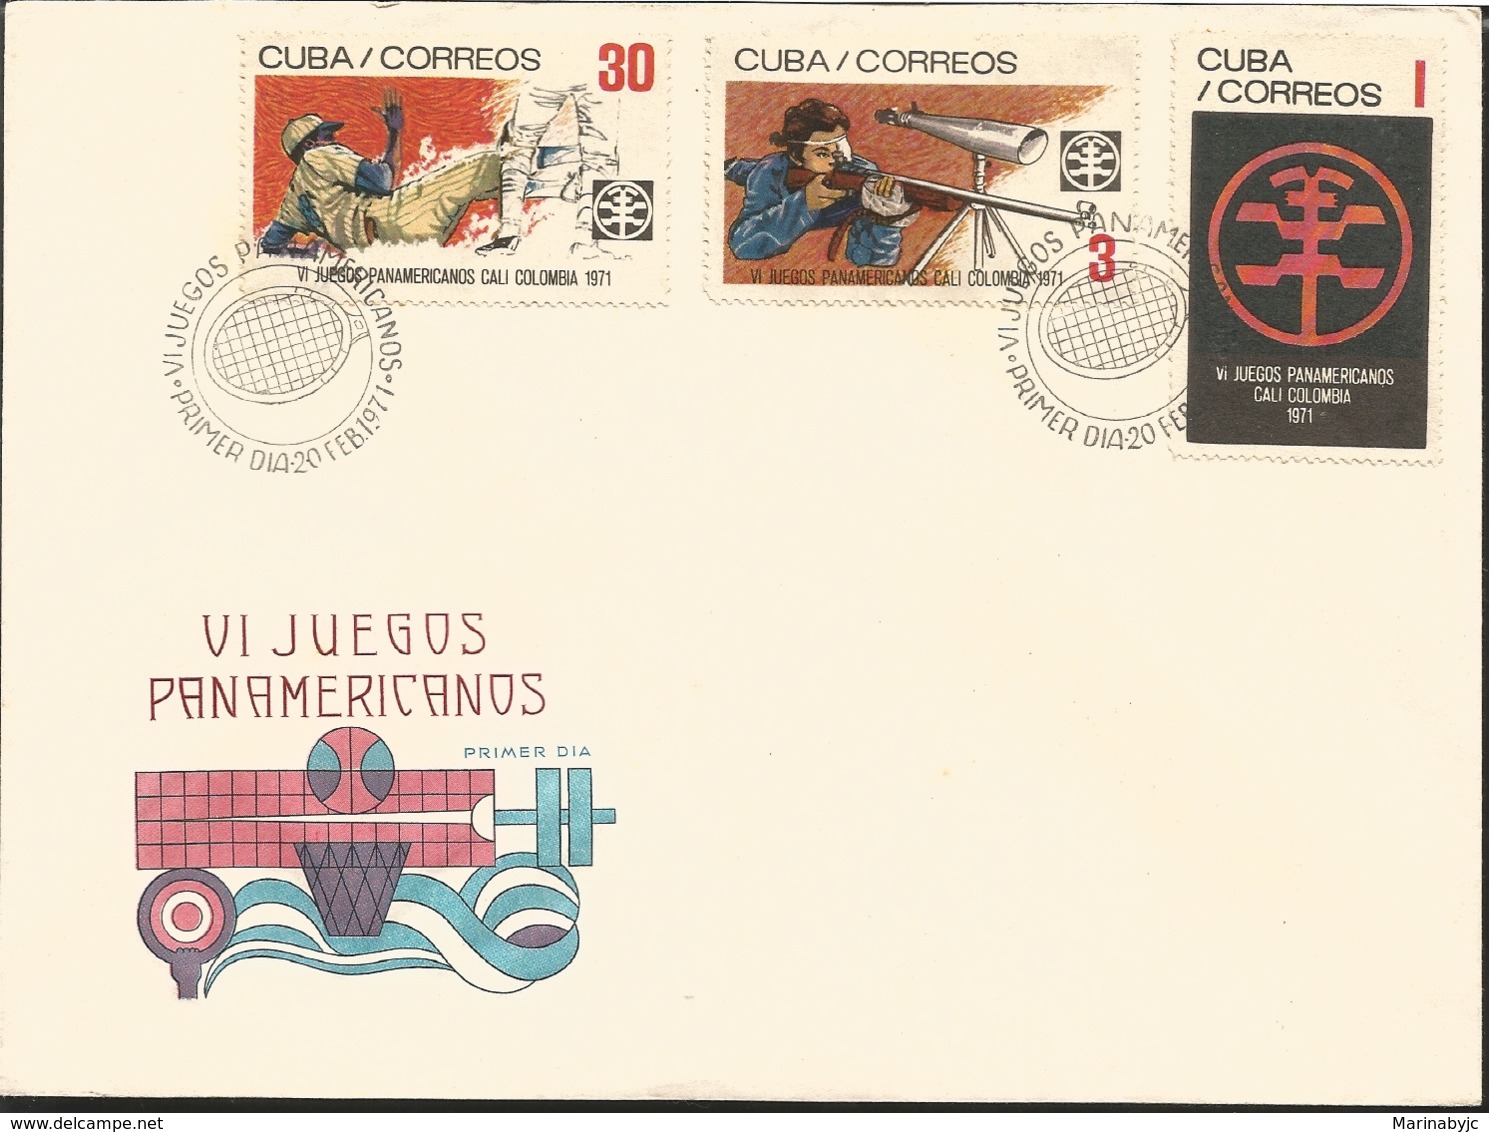 V) 1971 CARIBBEAN, 6TH PAN AMERICAN GAMES, CALI, COLOMBIA, BASEBALL, RIFLE SHOOTING, EMBLEM, WITH SLOGAN CANCELATION IN - Cartas & Documentos